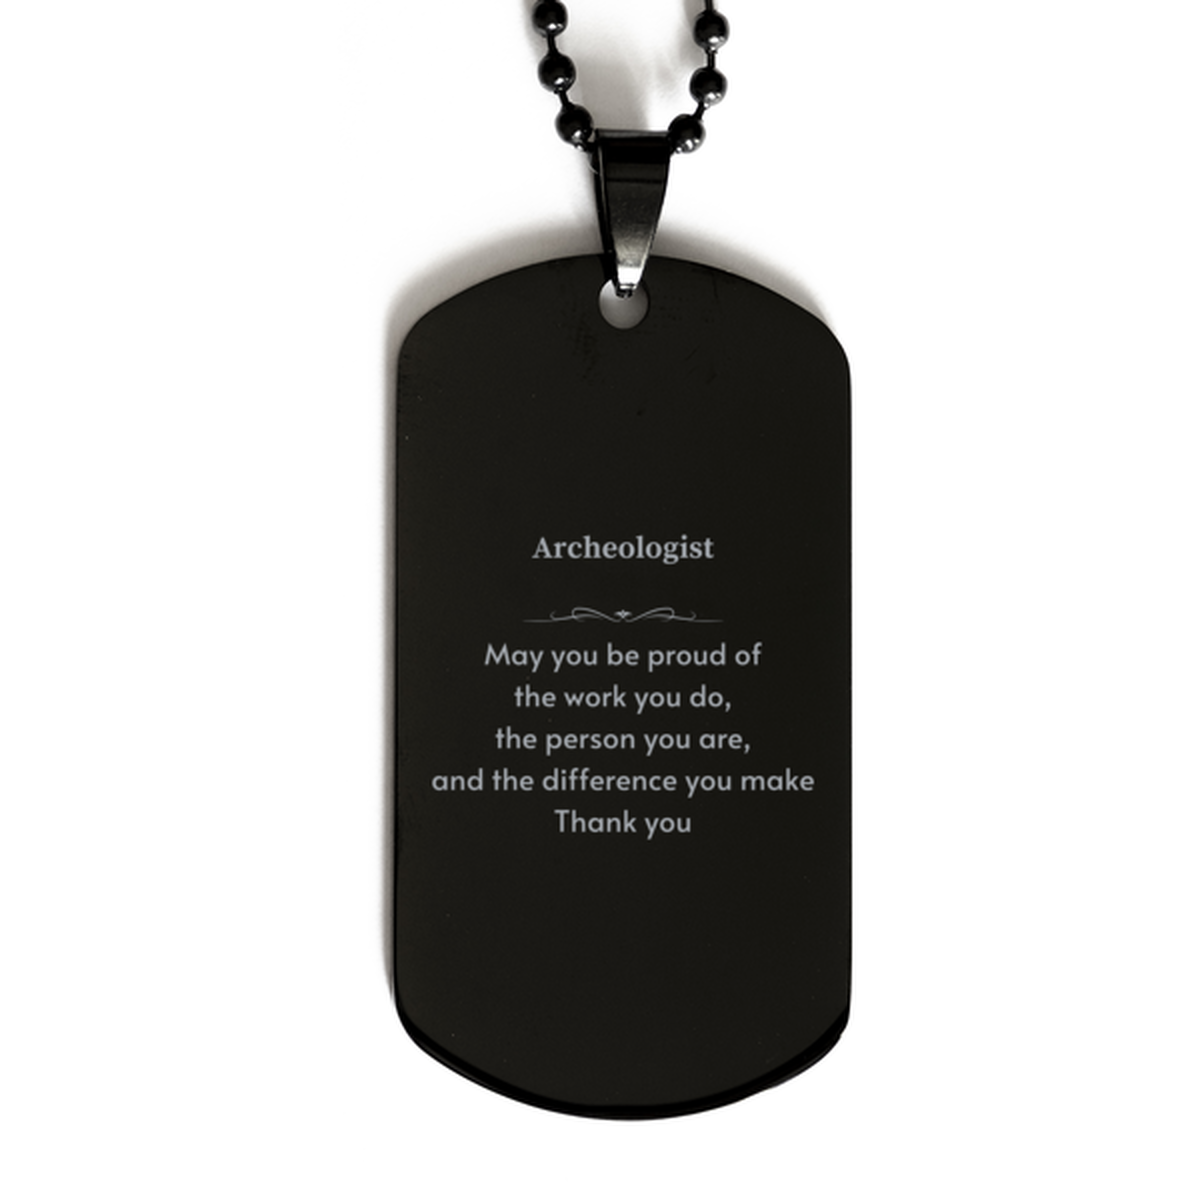 Heartwarming Black Dog Tag Retirement Coworkers Gifts for Archeologist, Archeologist May You be proud of the work you do, the person you are Gifts for Boss Men Women Friends